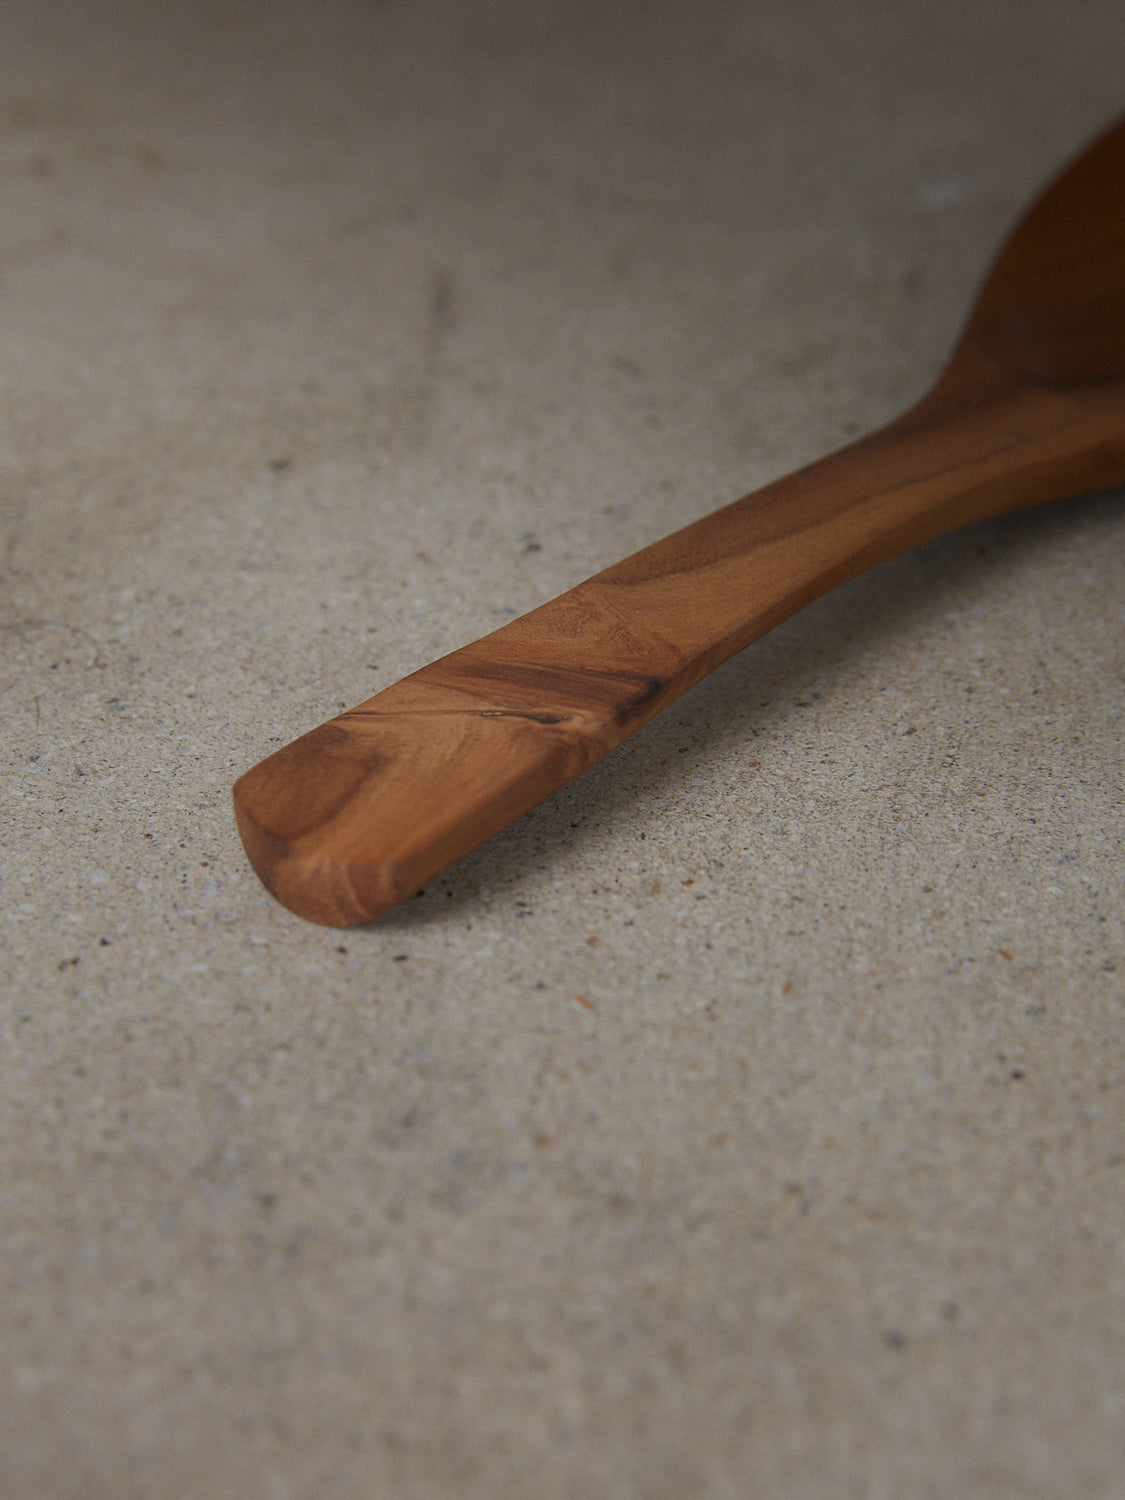  Elegantly curved scoop spoon with gently arched handle, hand carved from natural teak wood.